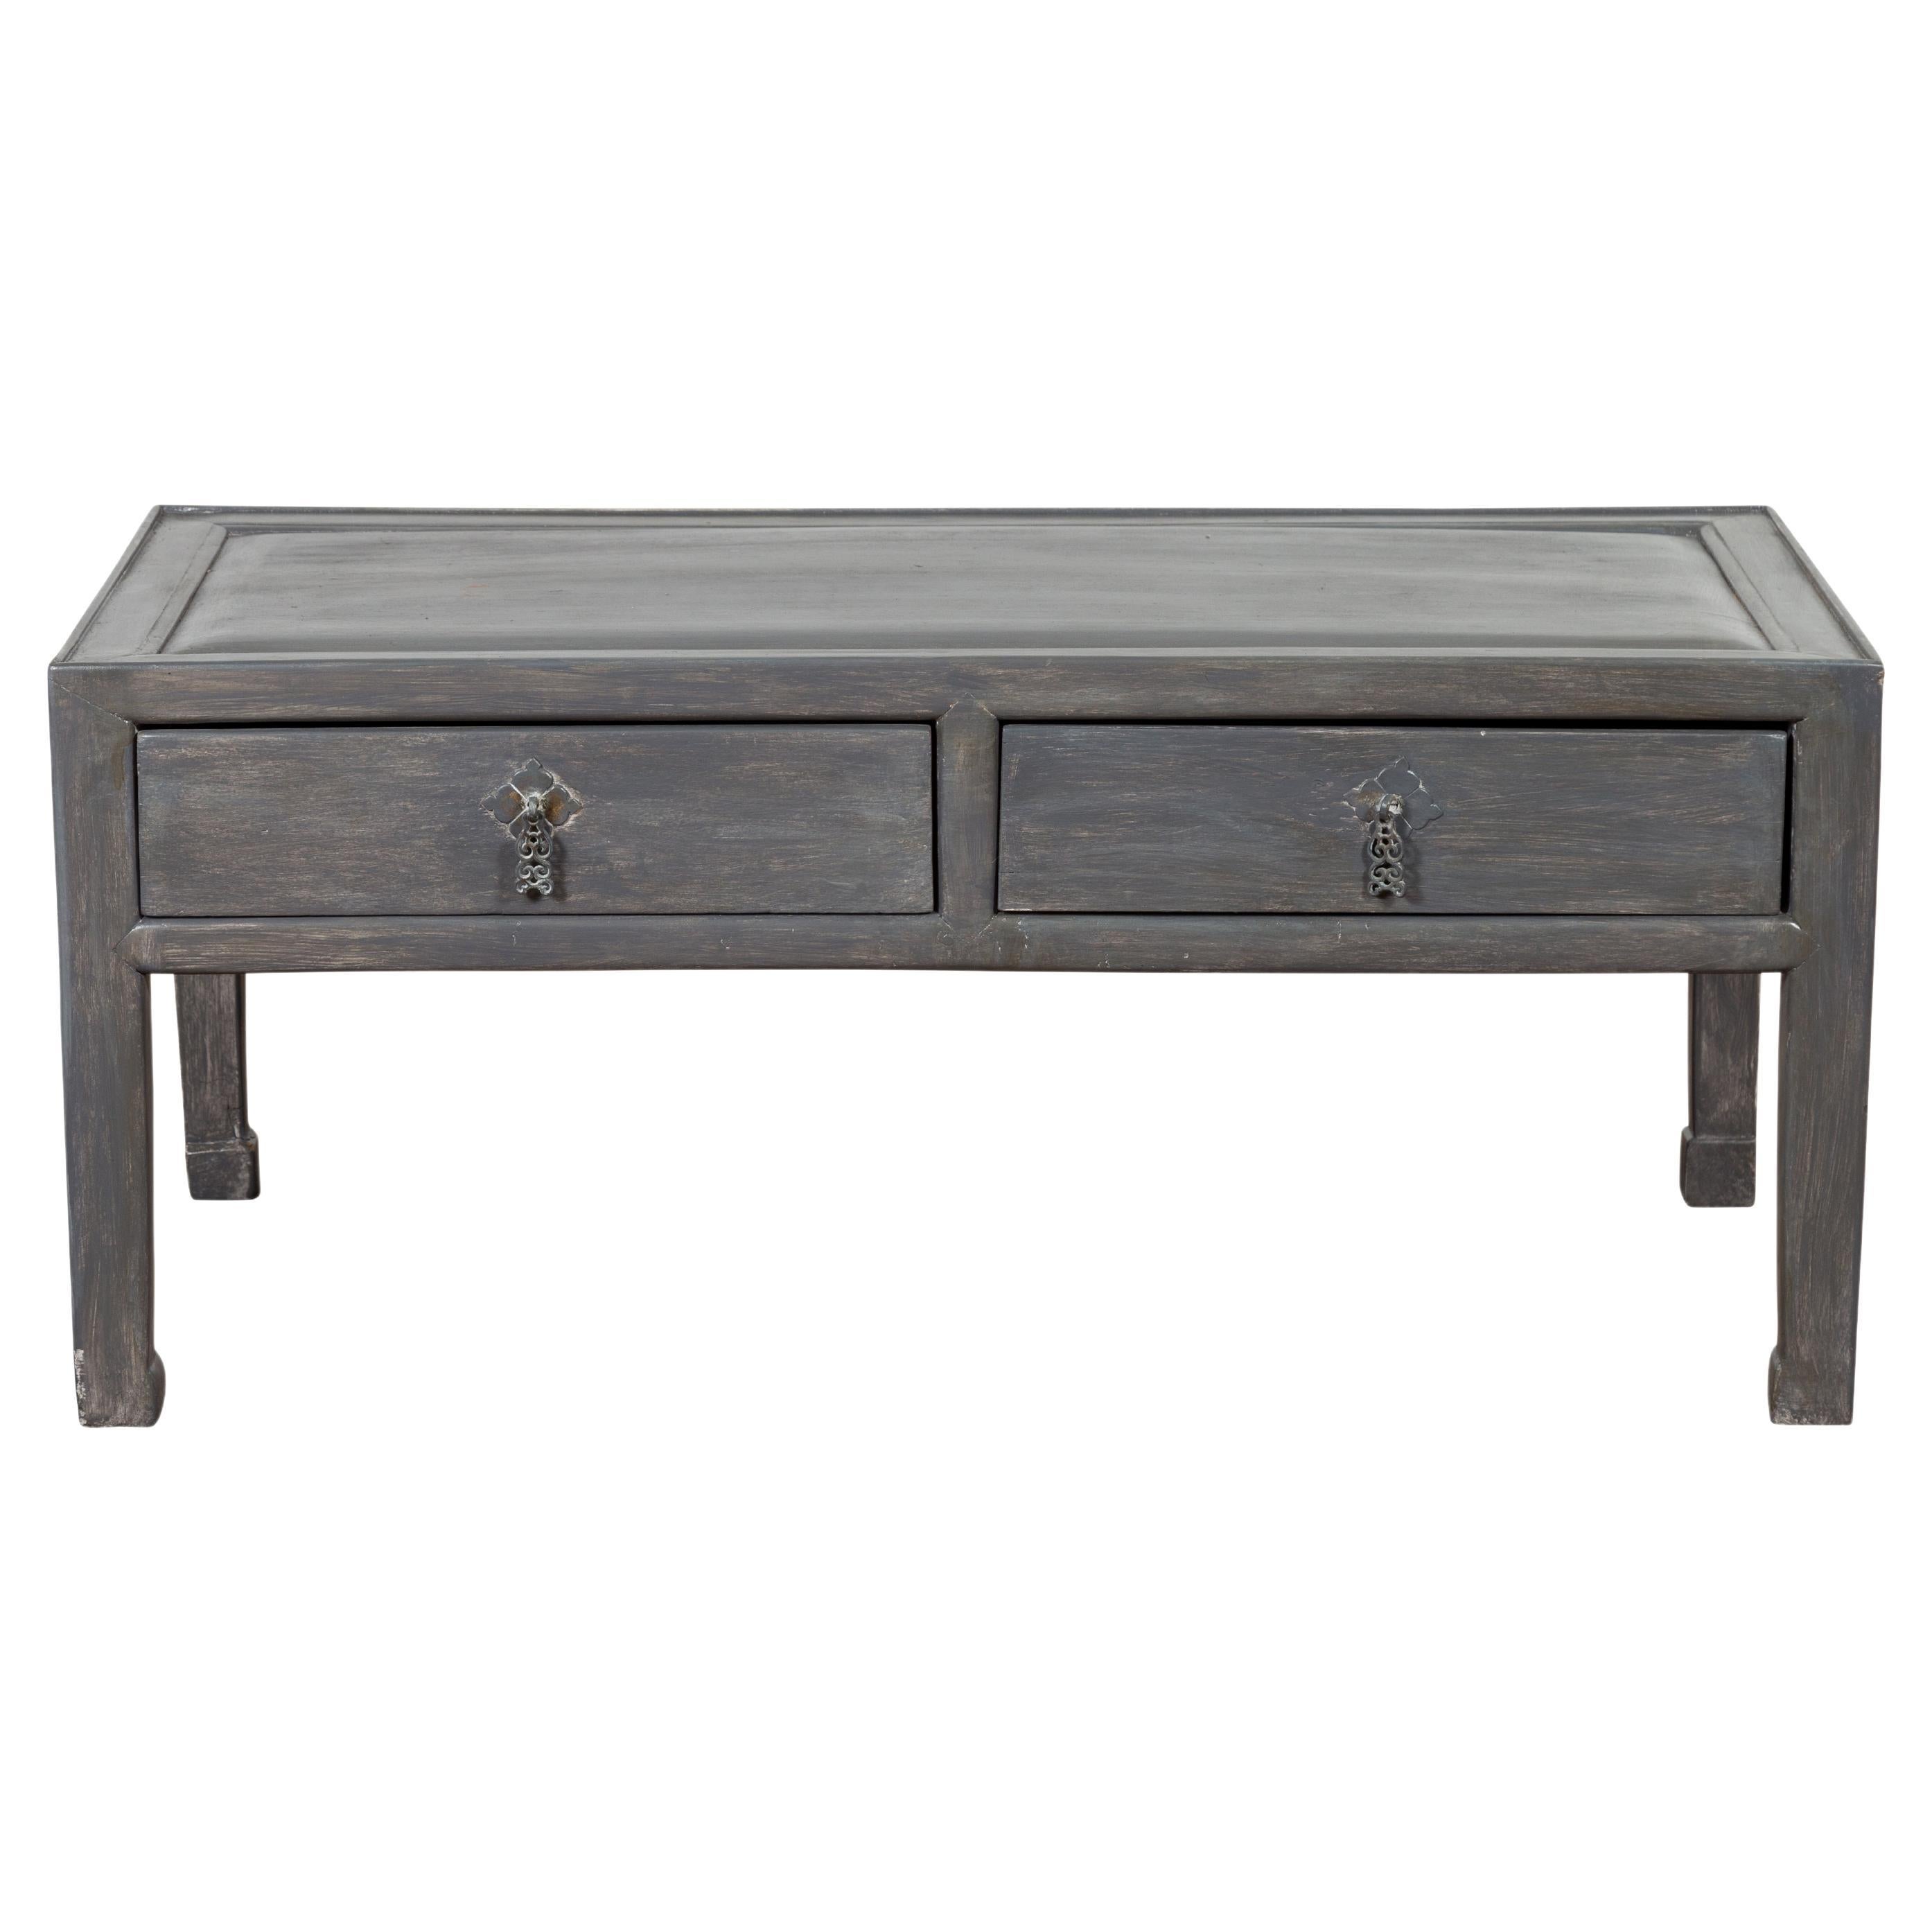 Chinese Late Qing Low Table with Two Drawers and Custom Grey Silver Lacquer For Sale